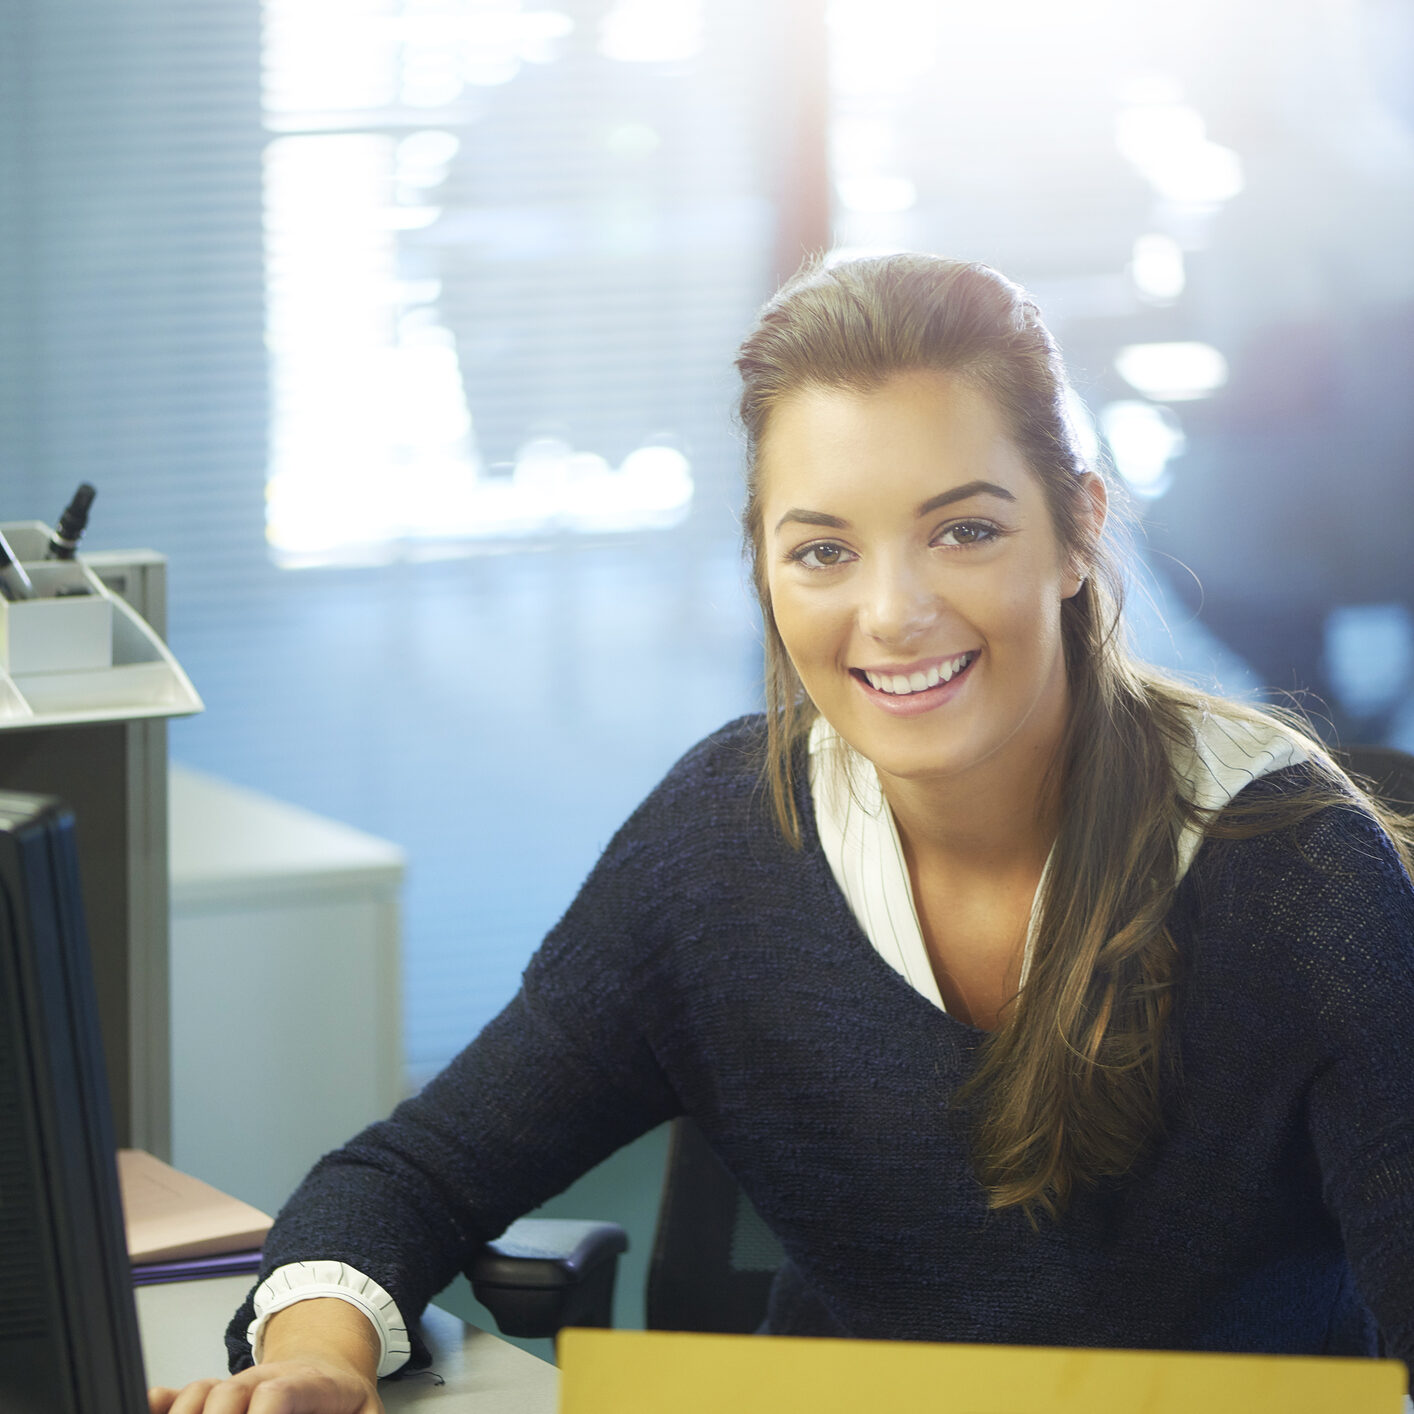 young female office worker or work experience student , sitting at her desk and looking at the camera . She is smiling to camera and looks very happy in her work.